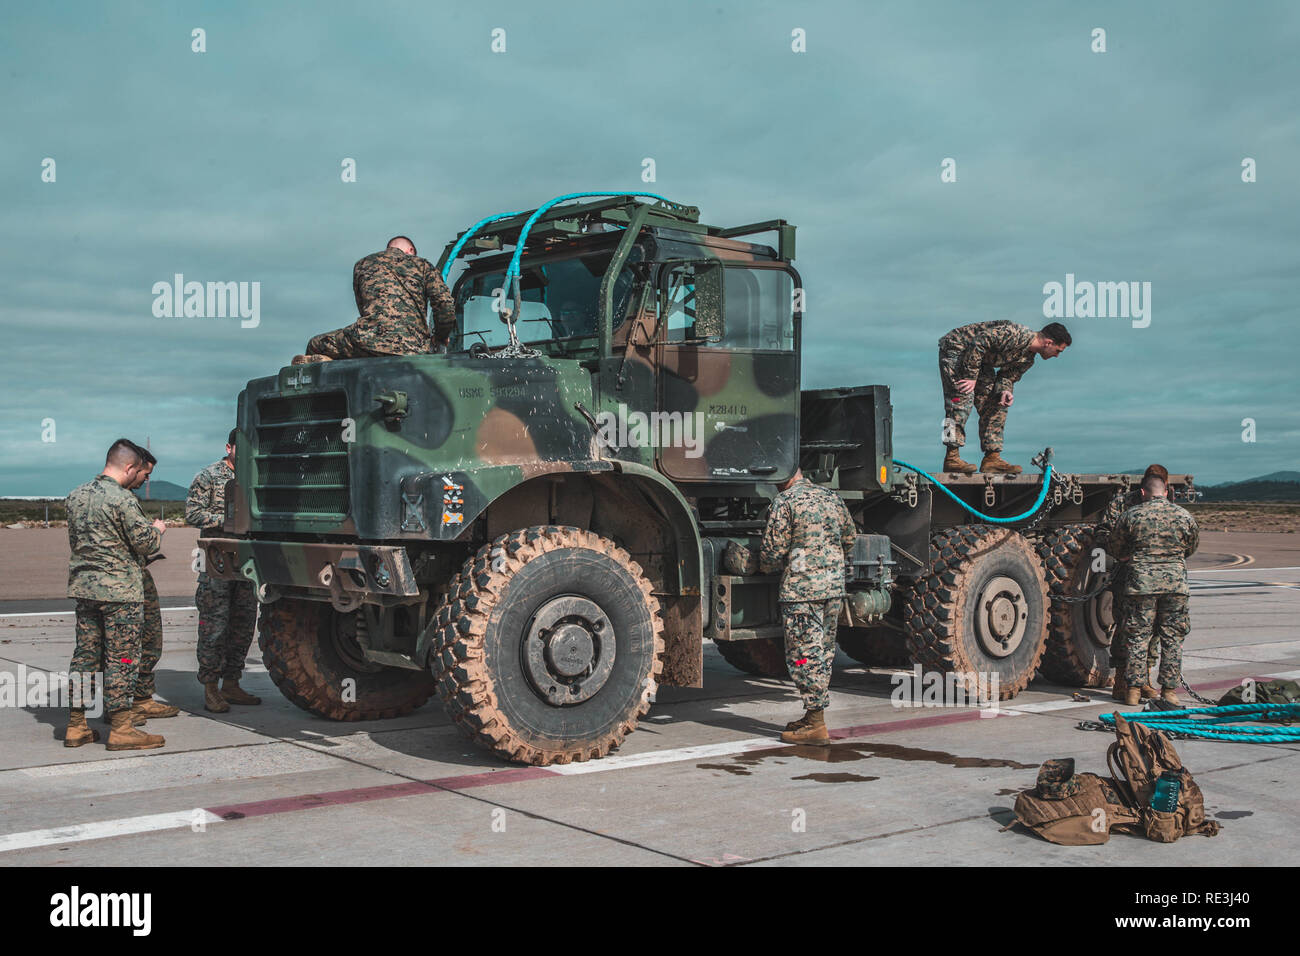 7 Ton Truck High Resolution Stock Photography and Images - Alamy